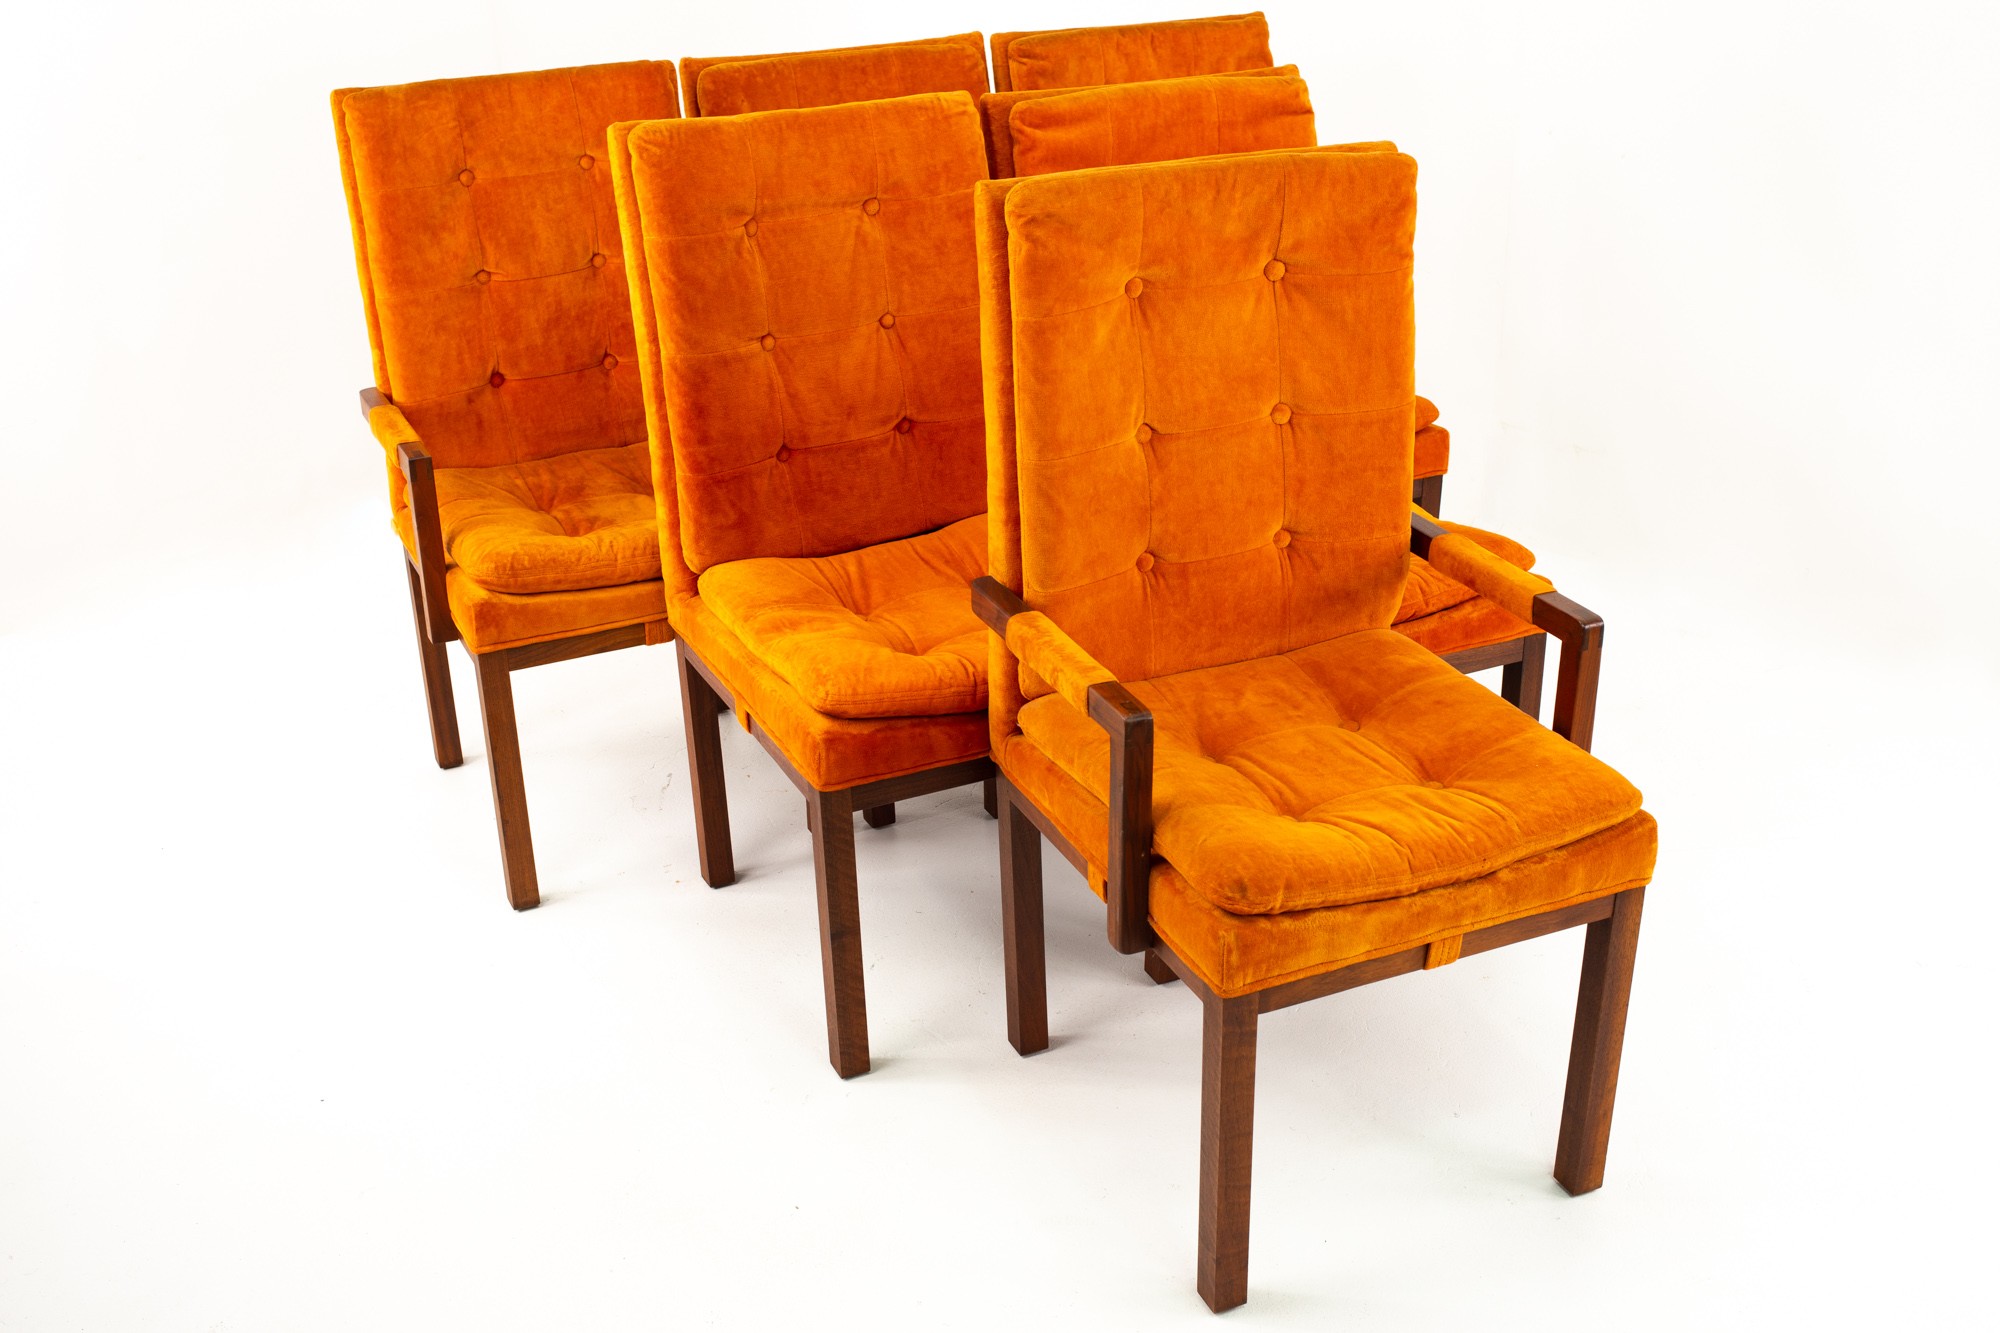 Milo Baughman Style Dillingham Orange and Walnut Upholstered Dining Chairs - Set of 6